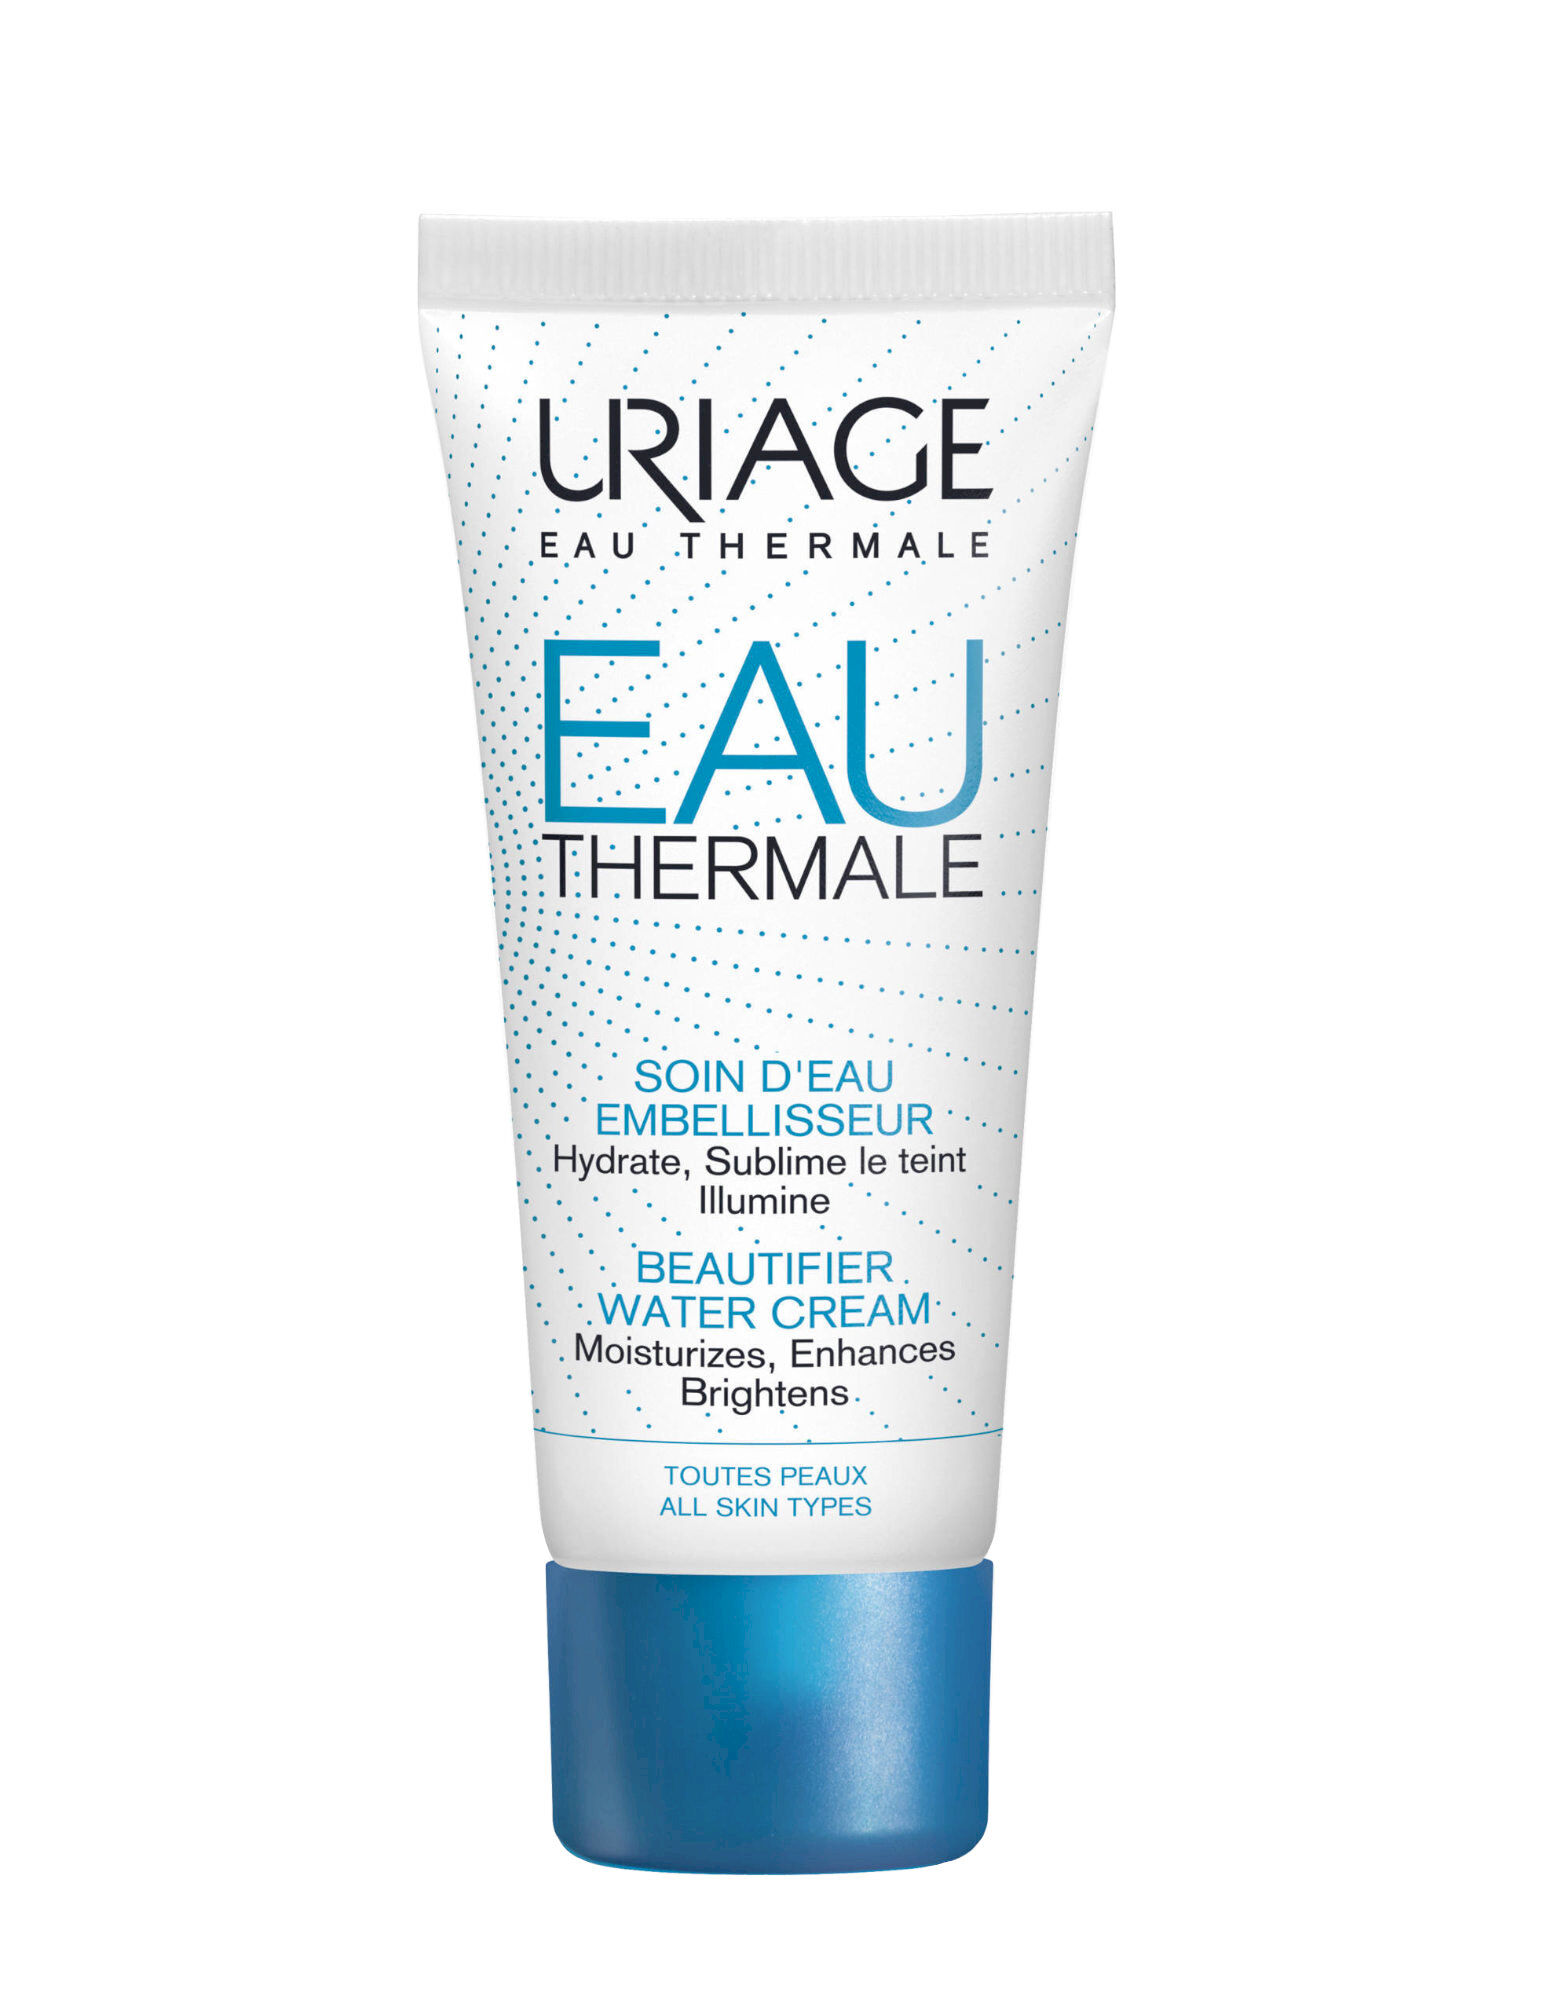 URIAGE Eau Thermale 40ml